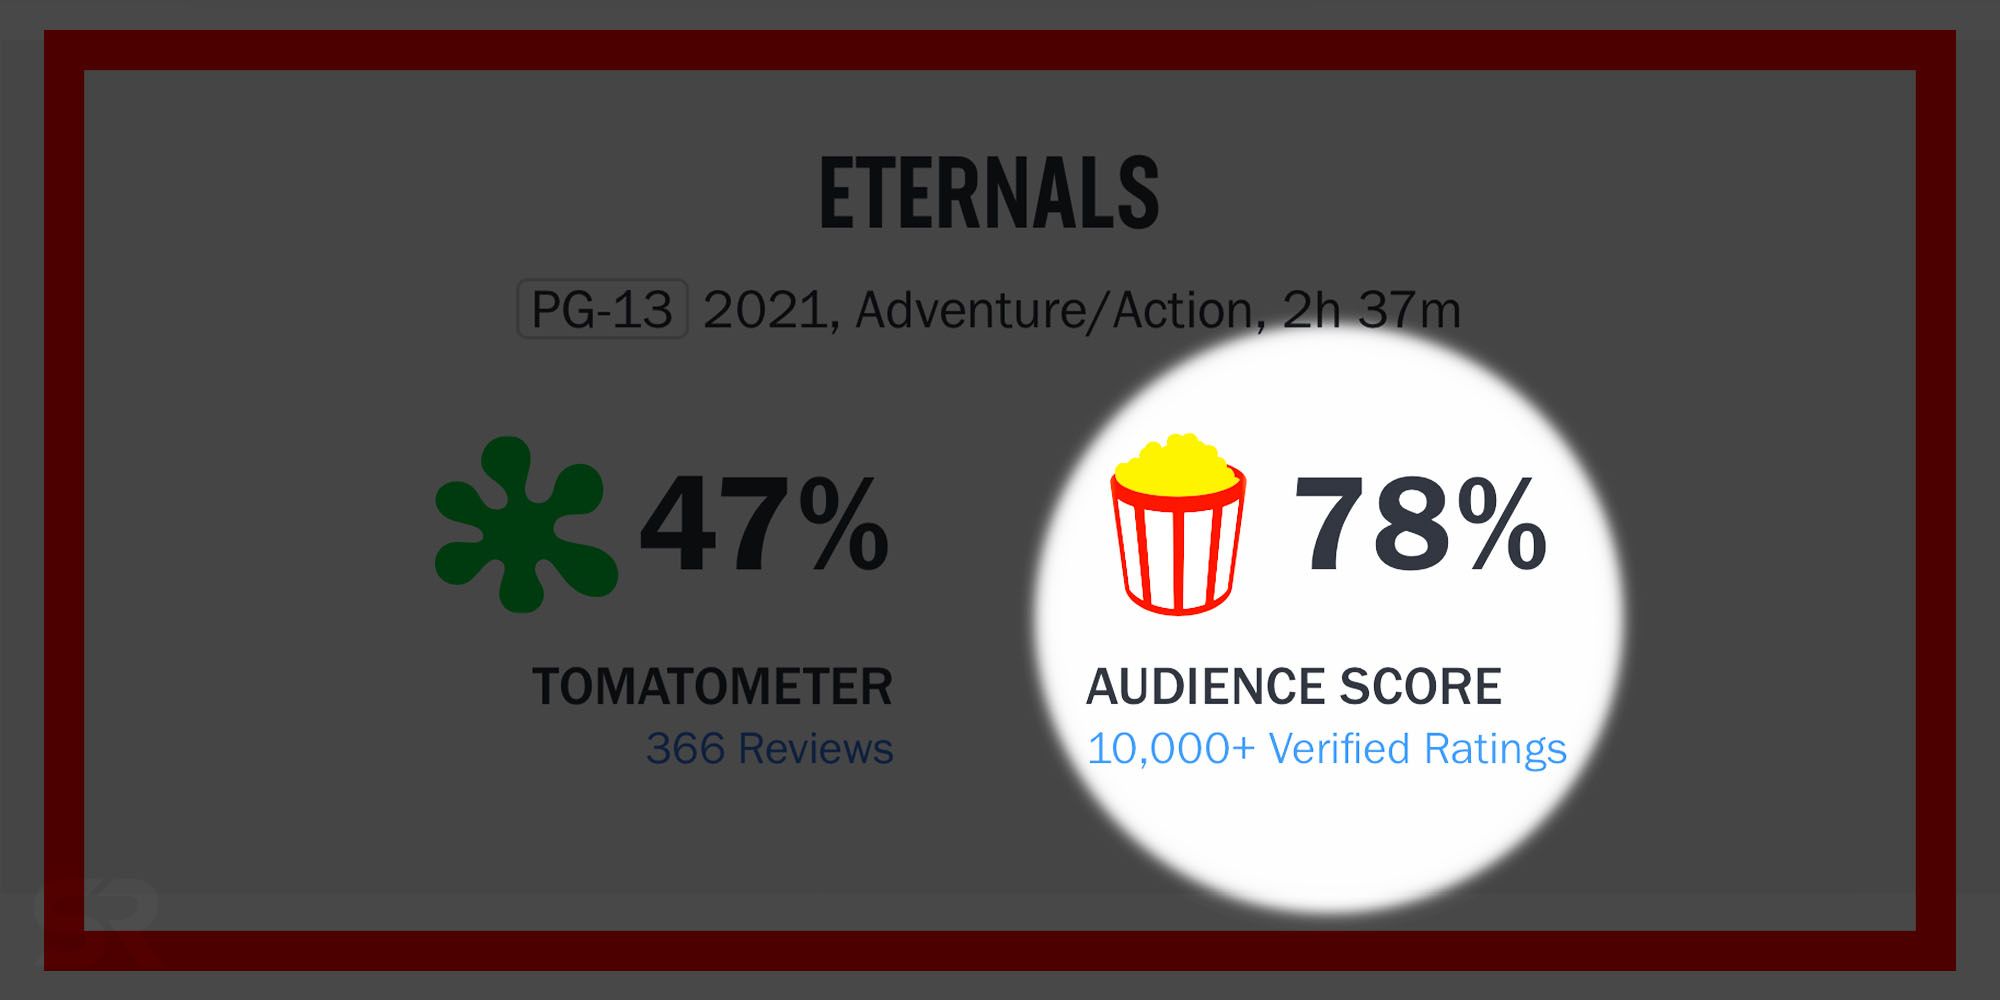 Look at the Star Wars Movies Average Rotten Tomatoes Score